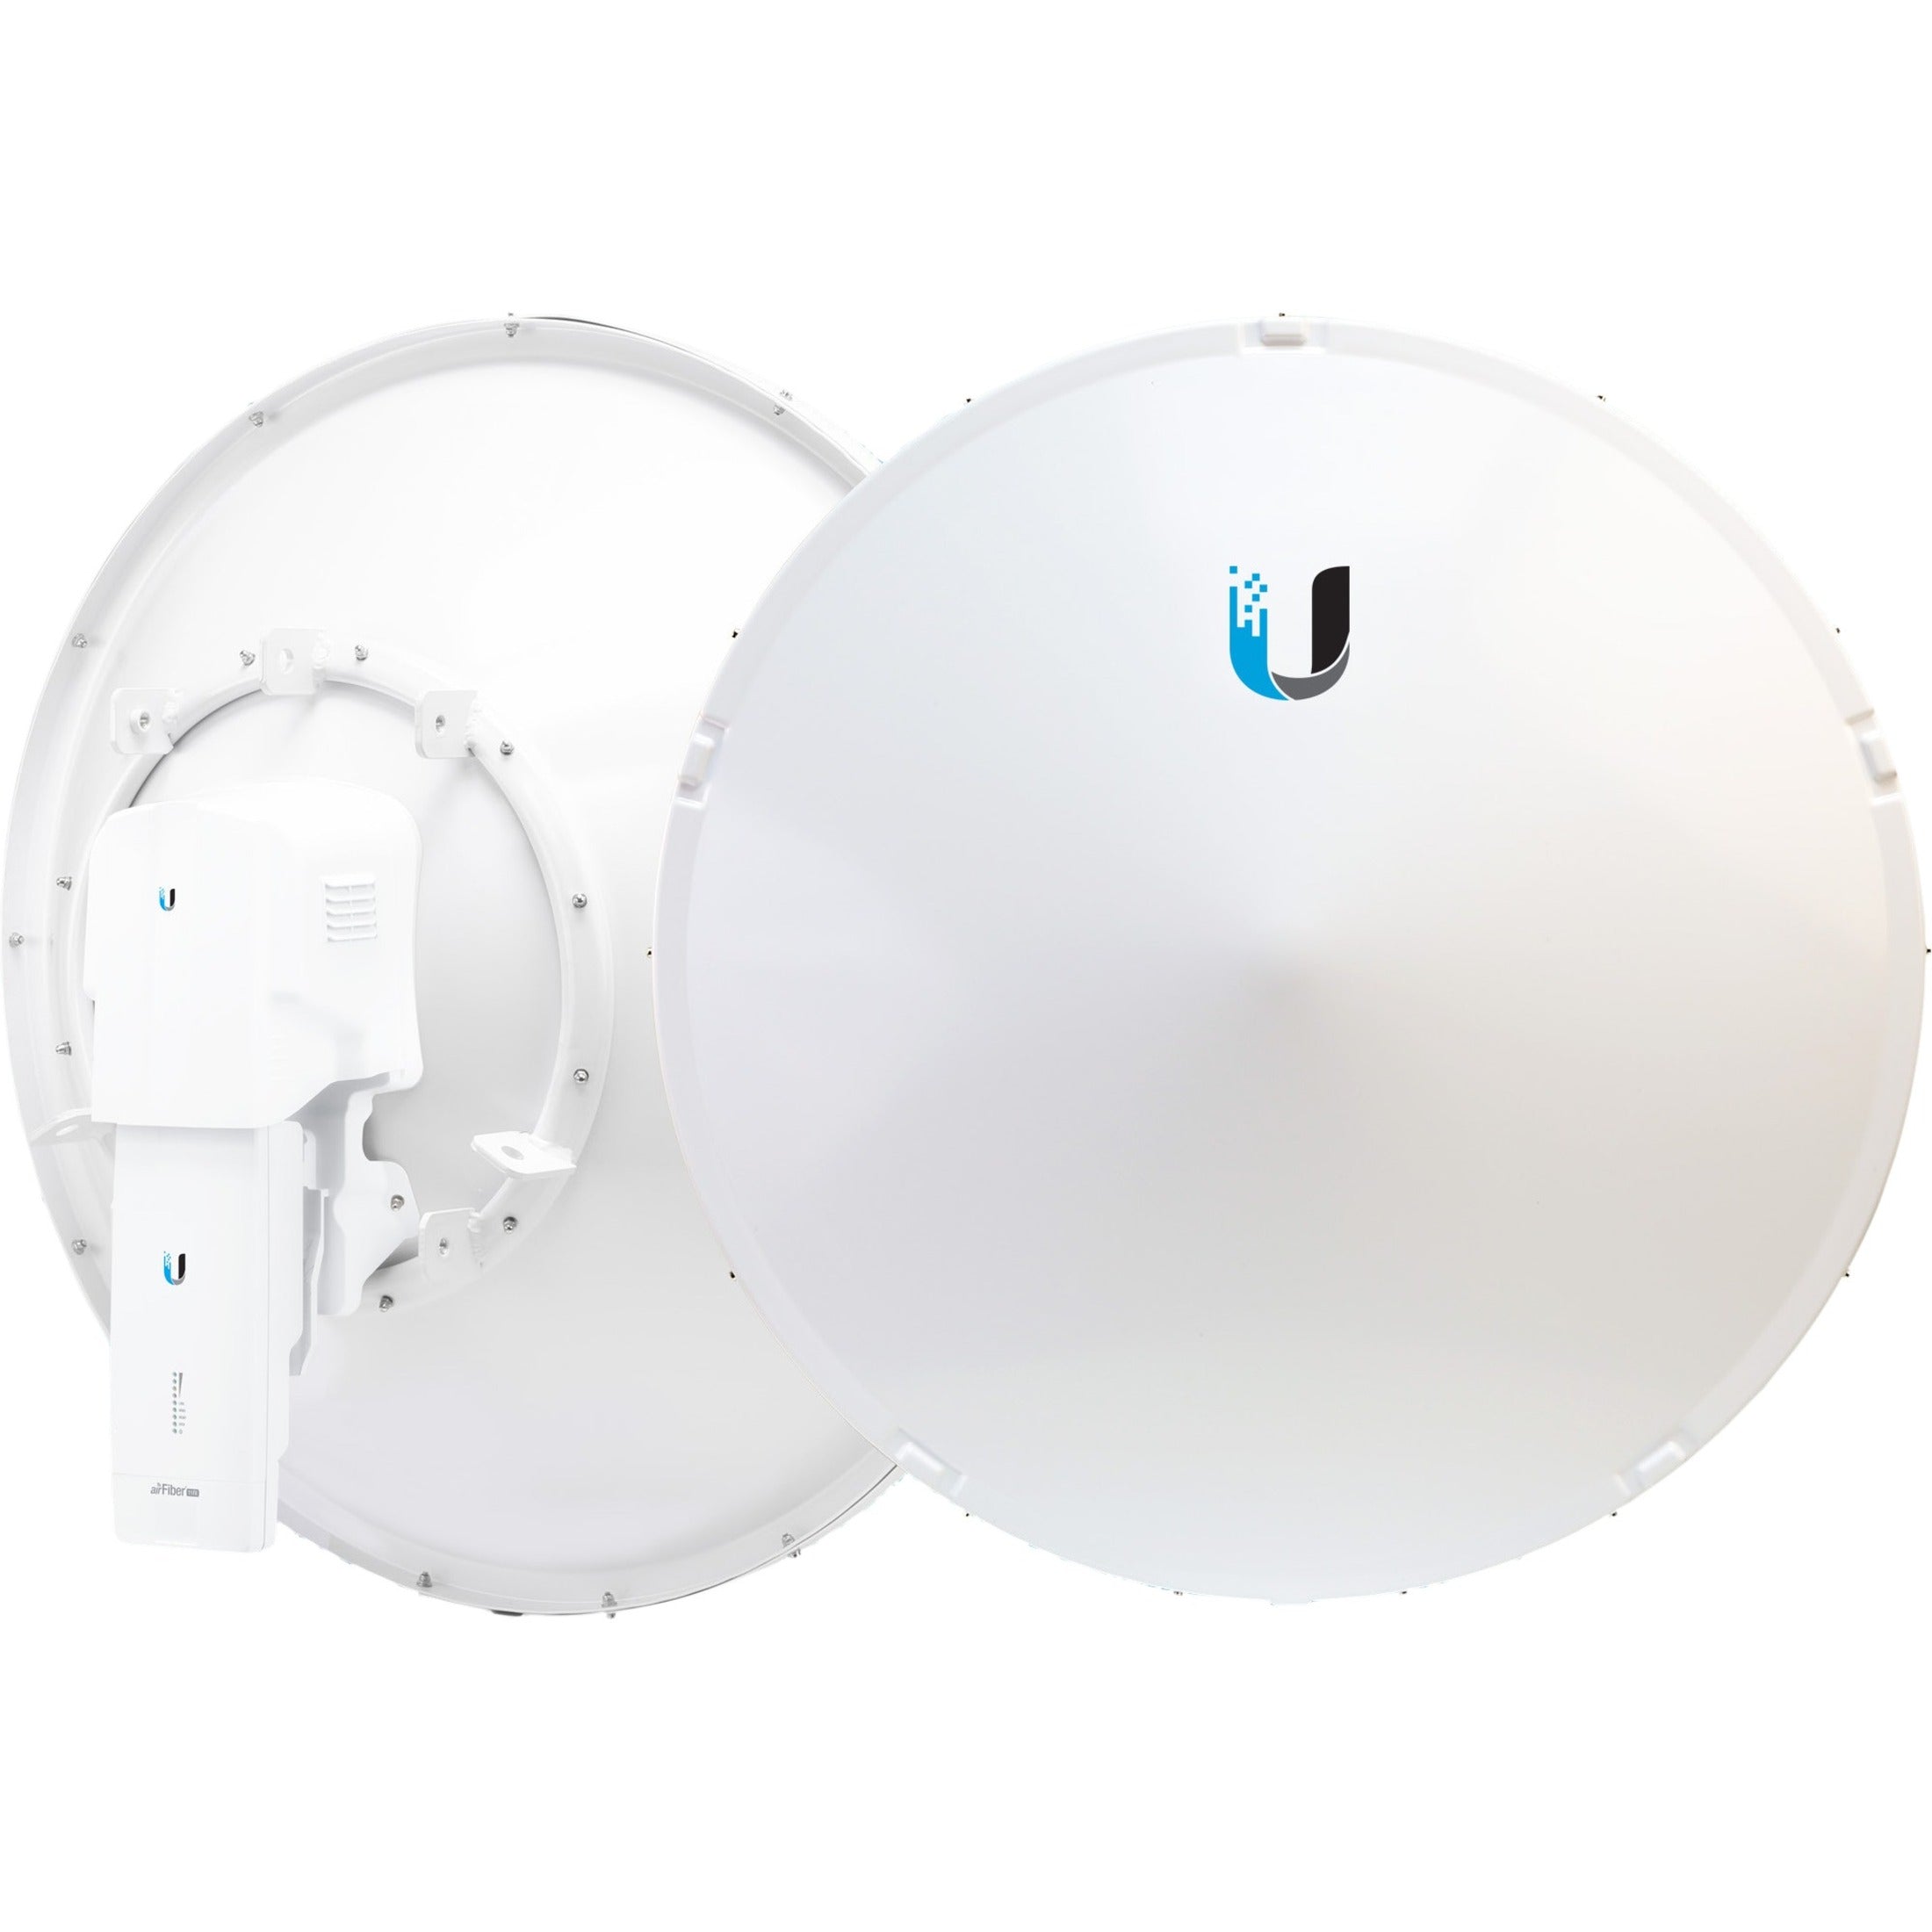 Ubiquiti AF11-COMPLETE-HB airFiber 11 AF-11 Satellite Radio, 1.2+ Gbps Wireless Access Point